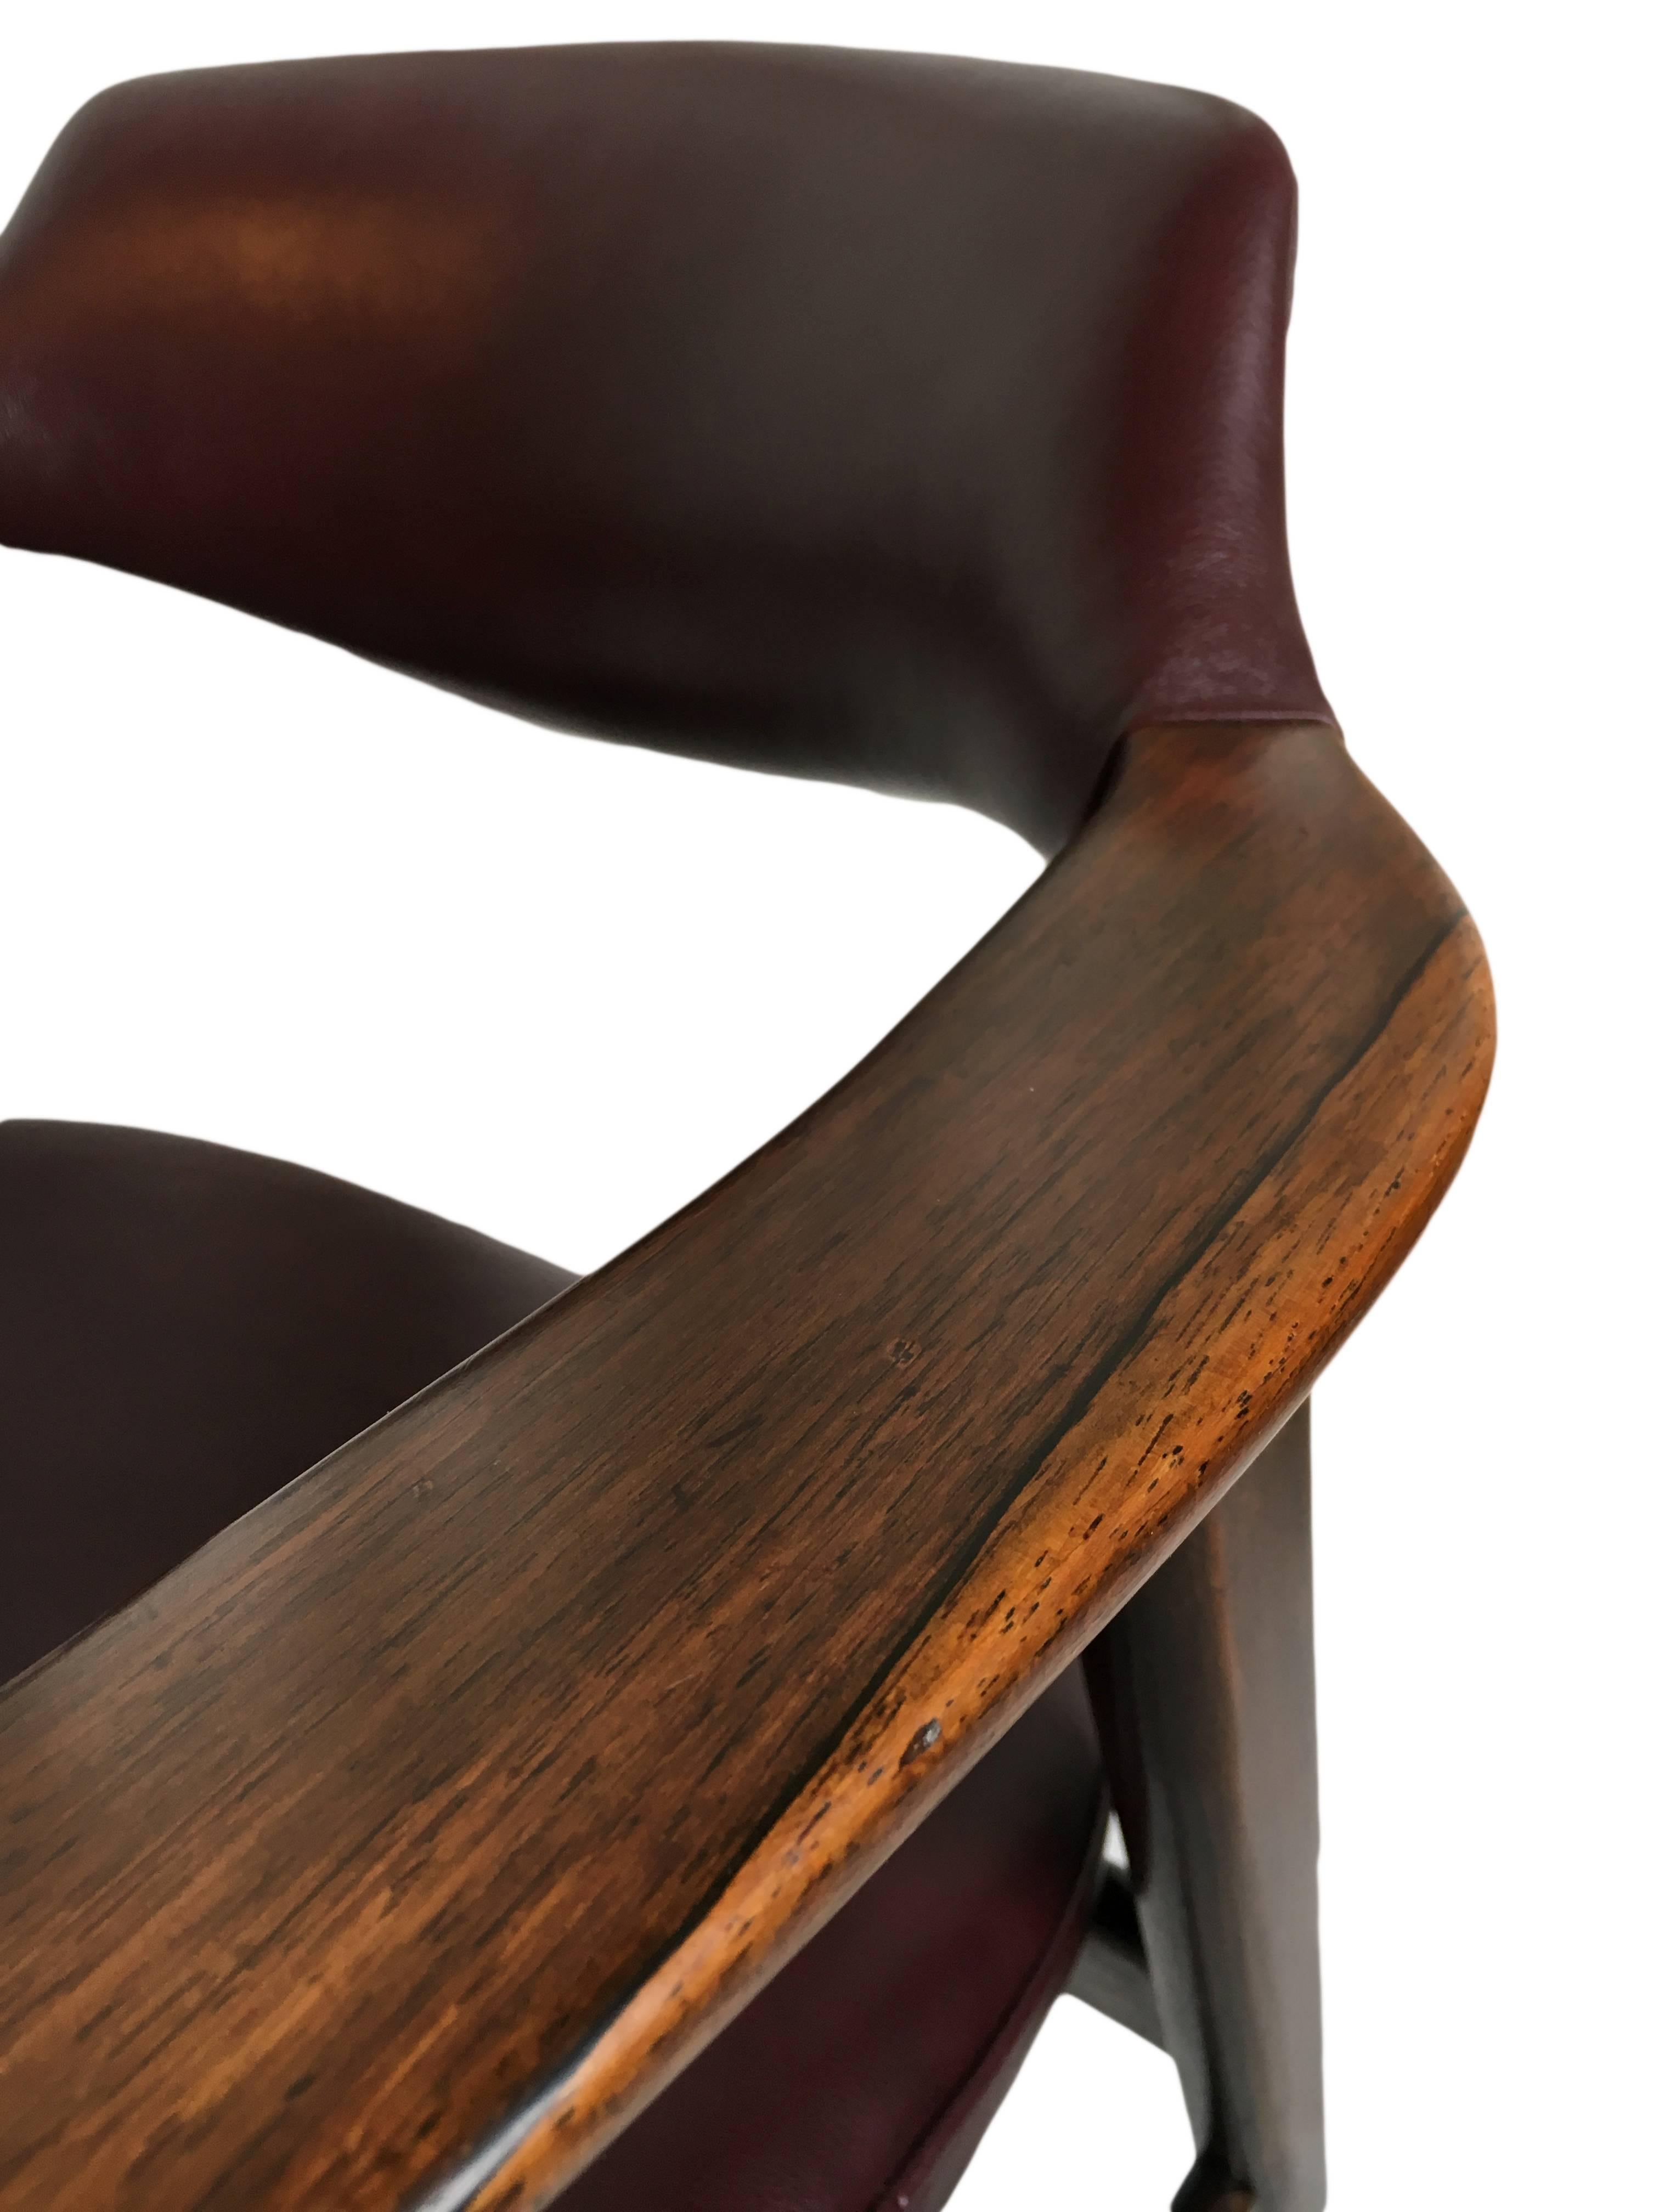 20th Century Erik Kirkegaard Rosewood and New Leather Chair